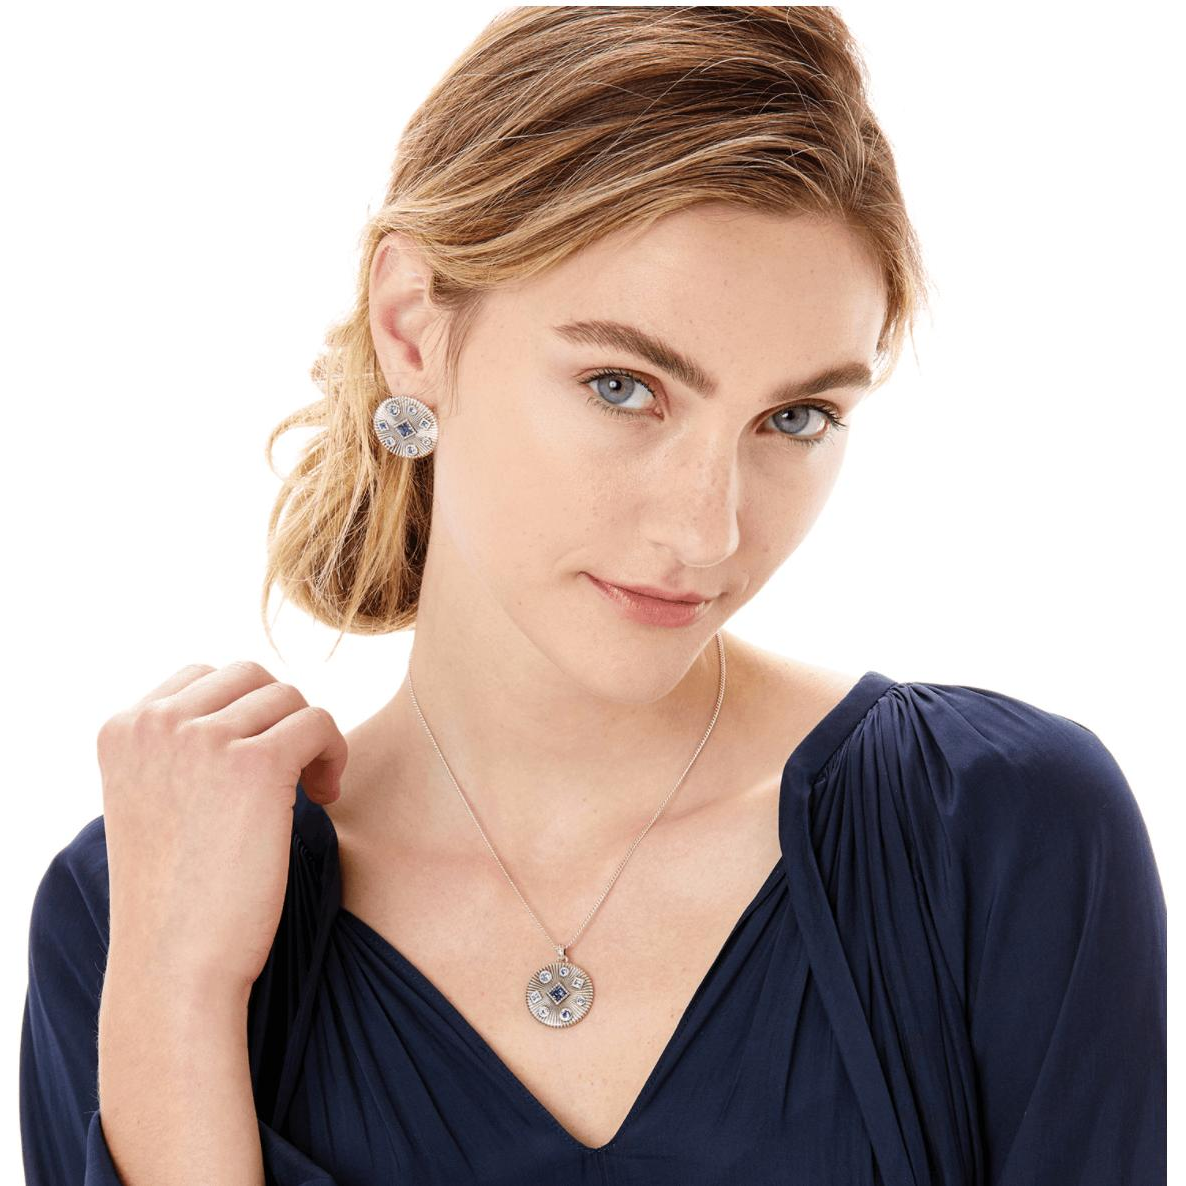 Halo Rays Petite Necklace - Zinnias Gift Boutique